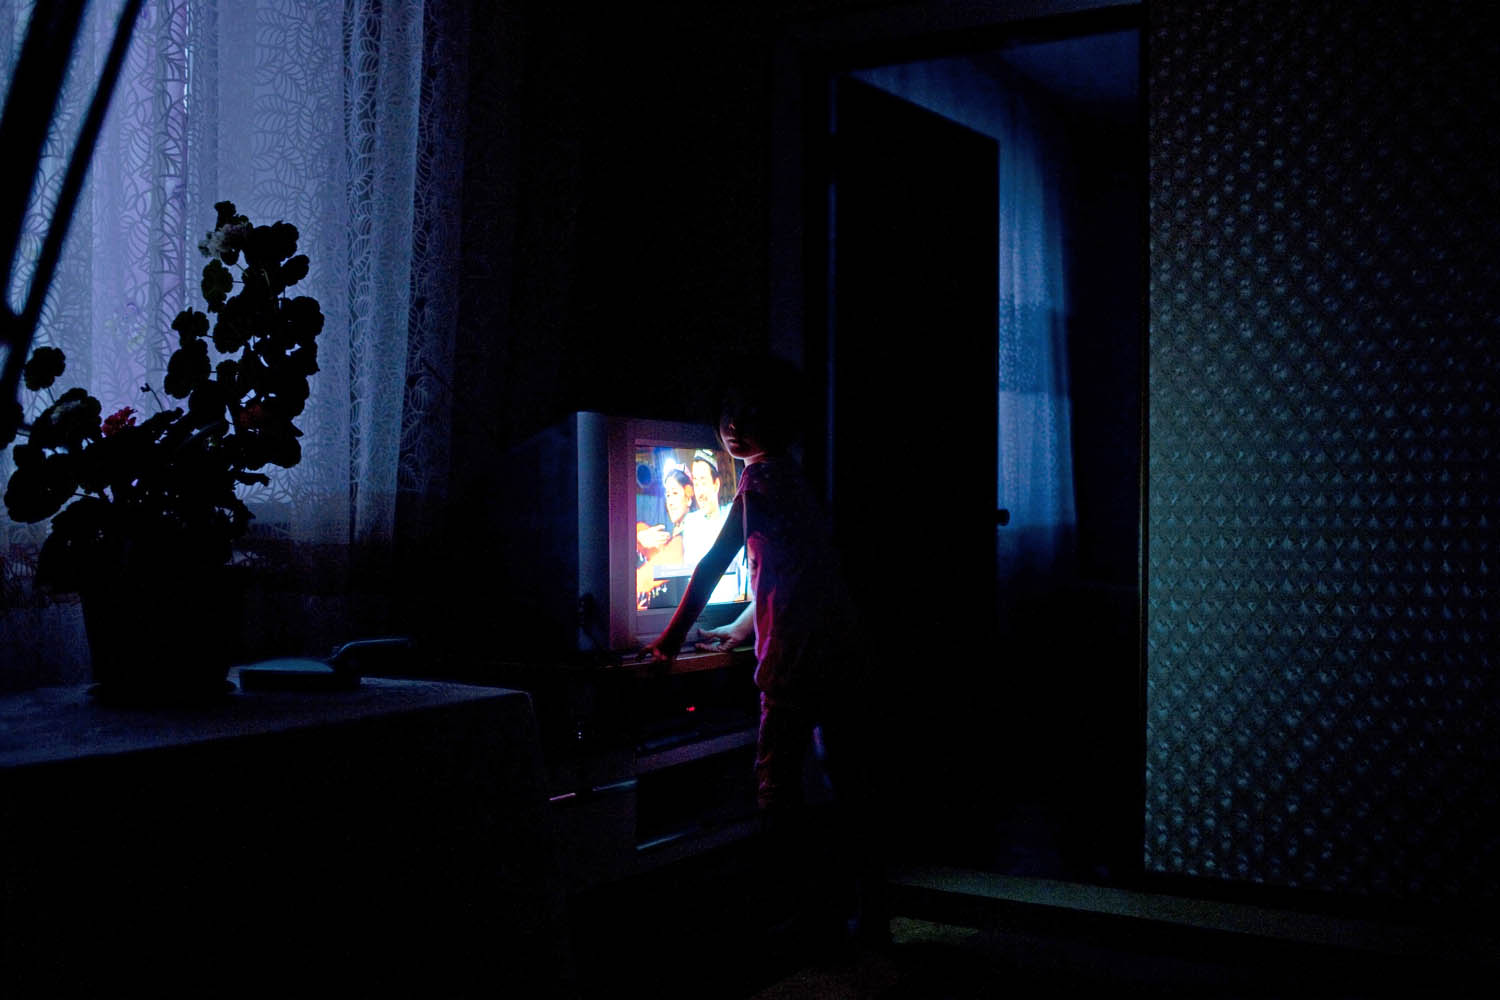 A young Uighur girl watches Uighur dancers on television at home in the Druzhba neighborhood of Almaty.